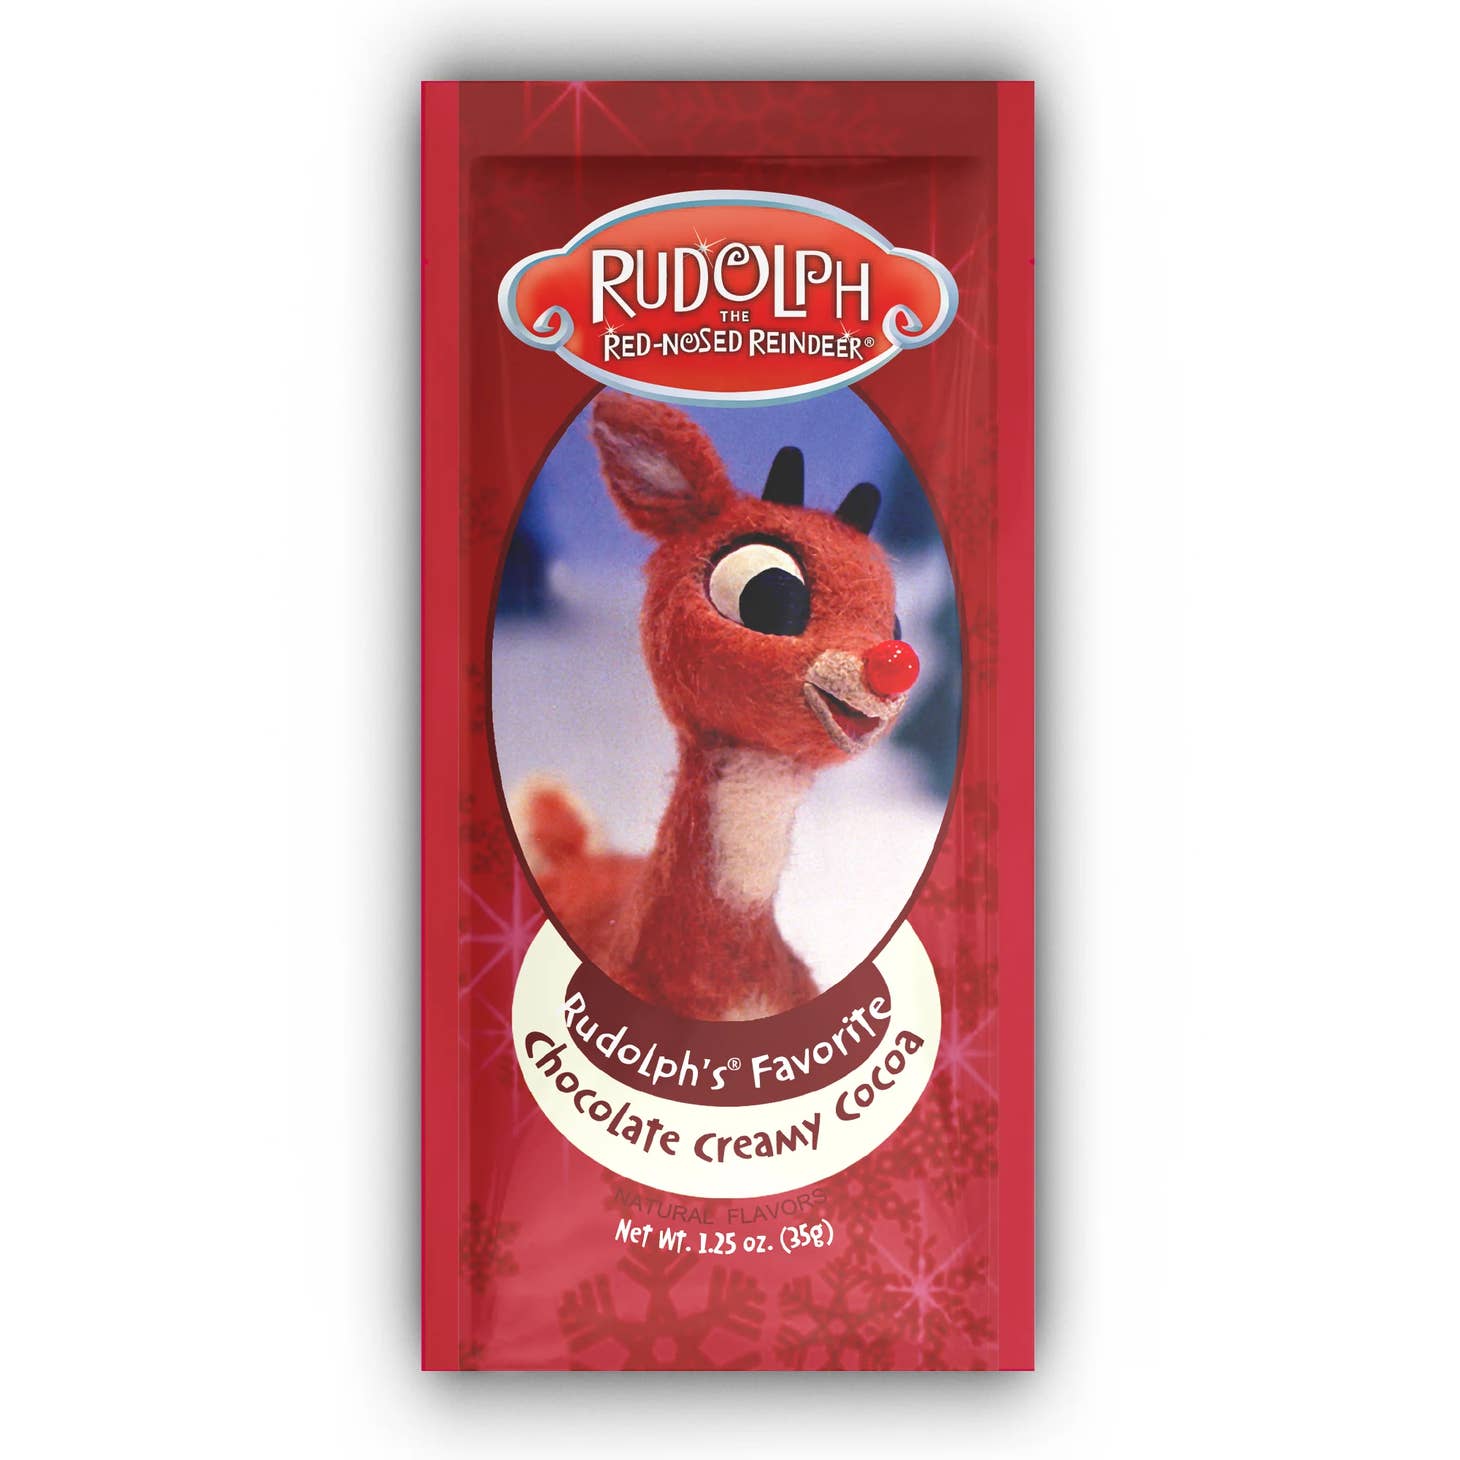 rudolph's favorite chocoate cocoa packet with rudolph on the front on a white background